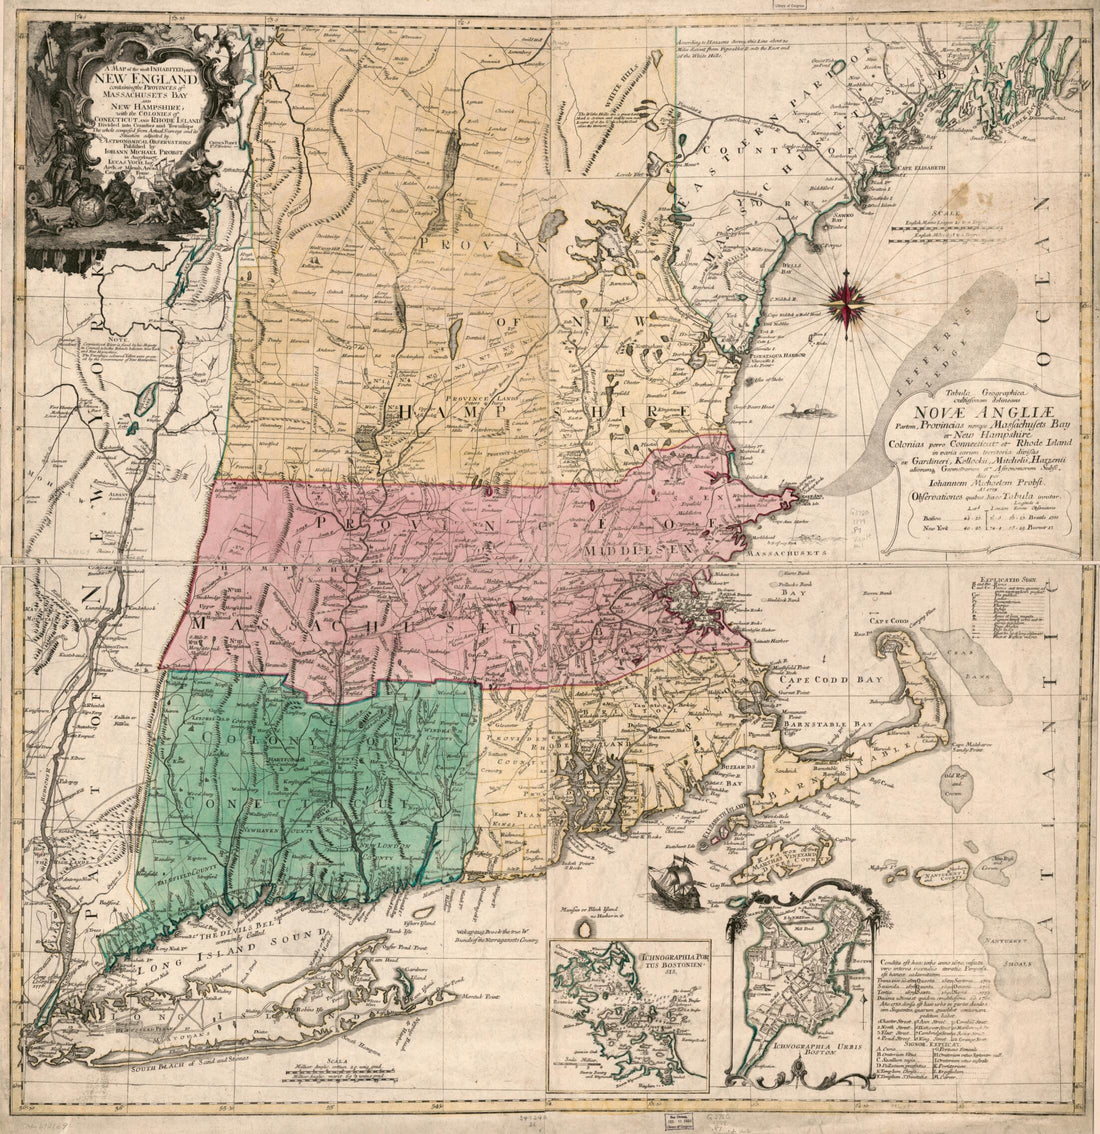 This old map of A Map of the Most Inhabited Part of New England, Containing the Provinces of Massachusets Bay and New Hampshire, With the Colonies of Conecticut and Rhode Island, Divided Into Counties and Townships; the Whole Composed from Actual Surveys